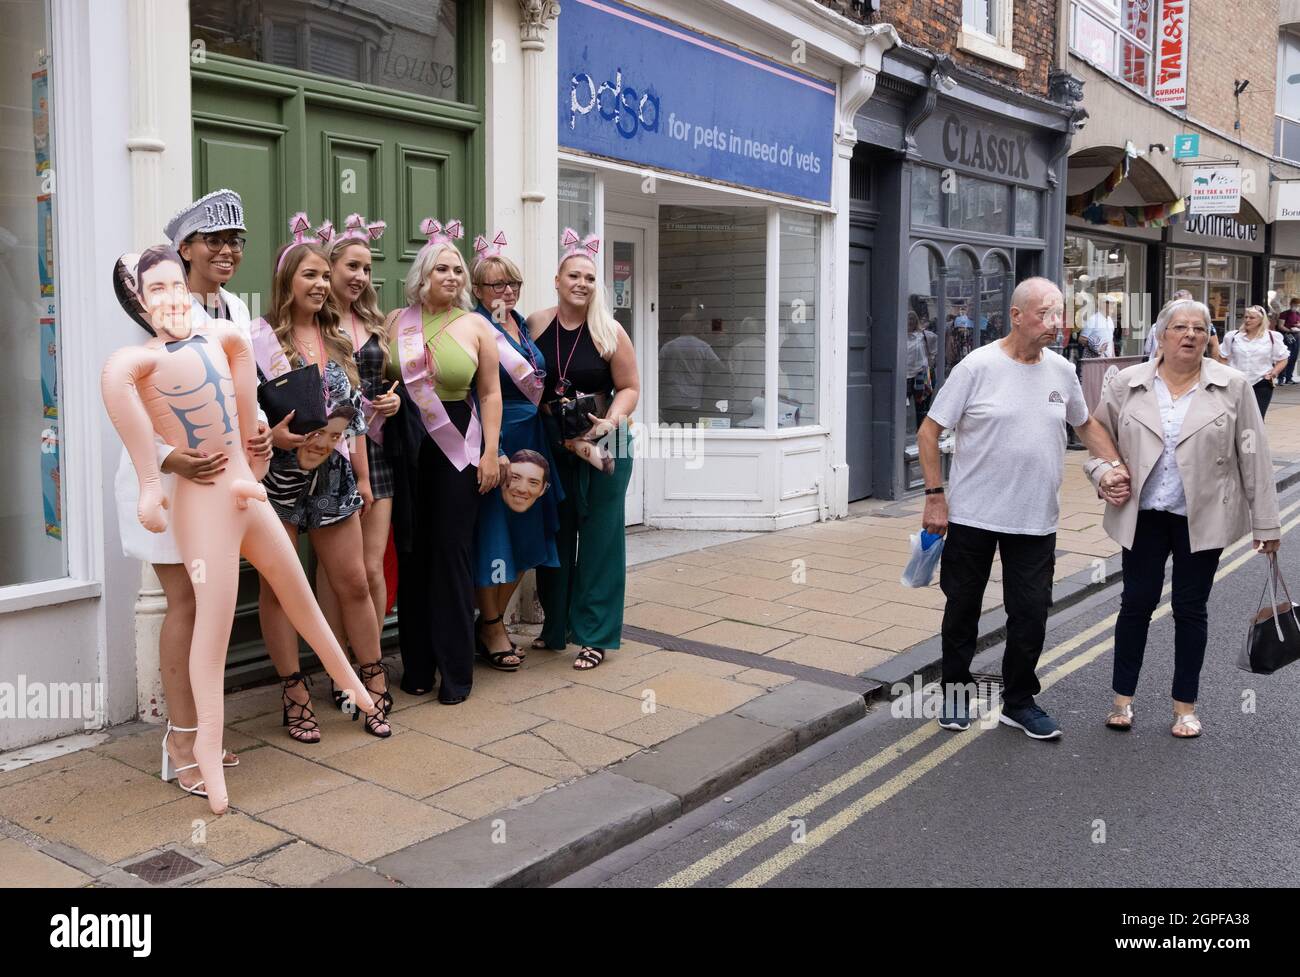 Hen party UK; a hen party having photos on The street, opportunity for street photography, York UK Stock Photo